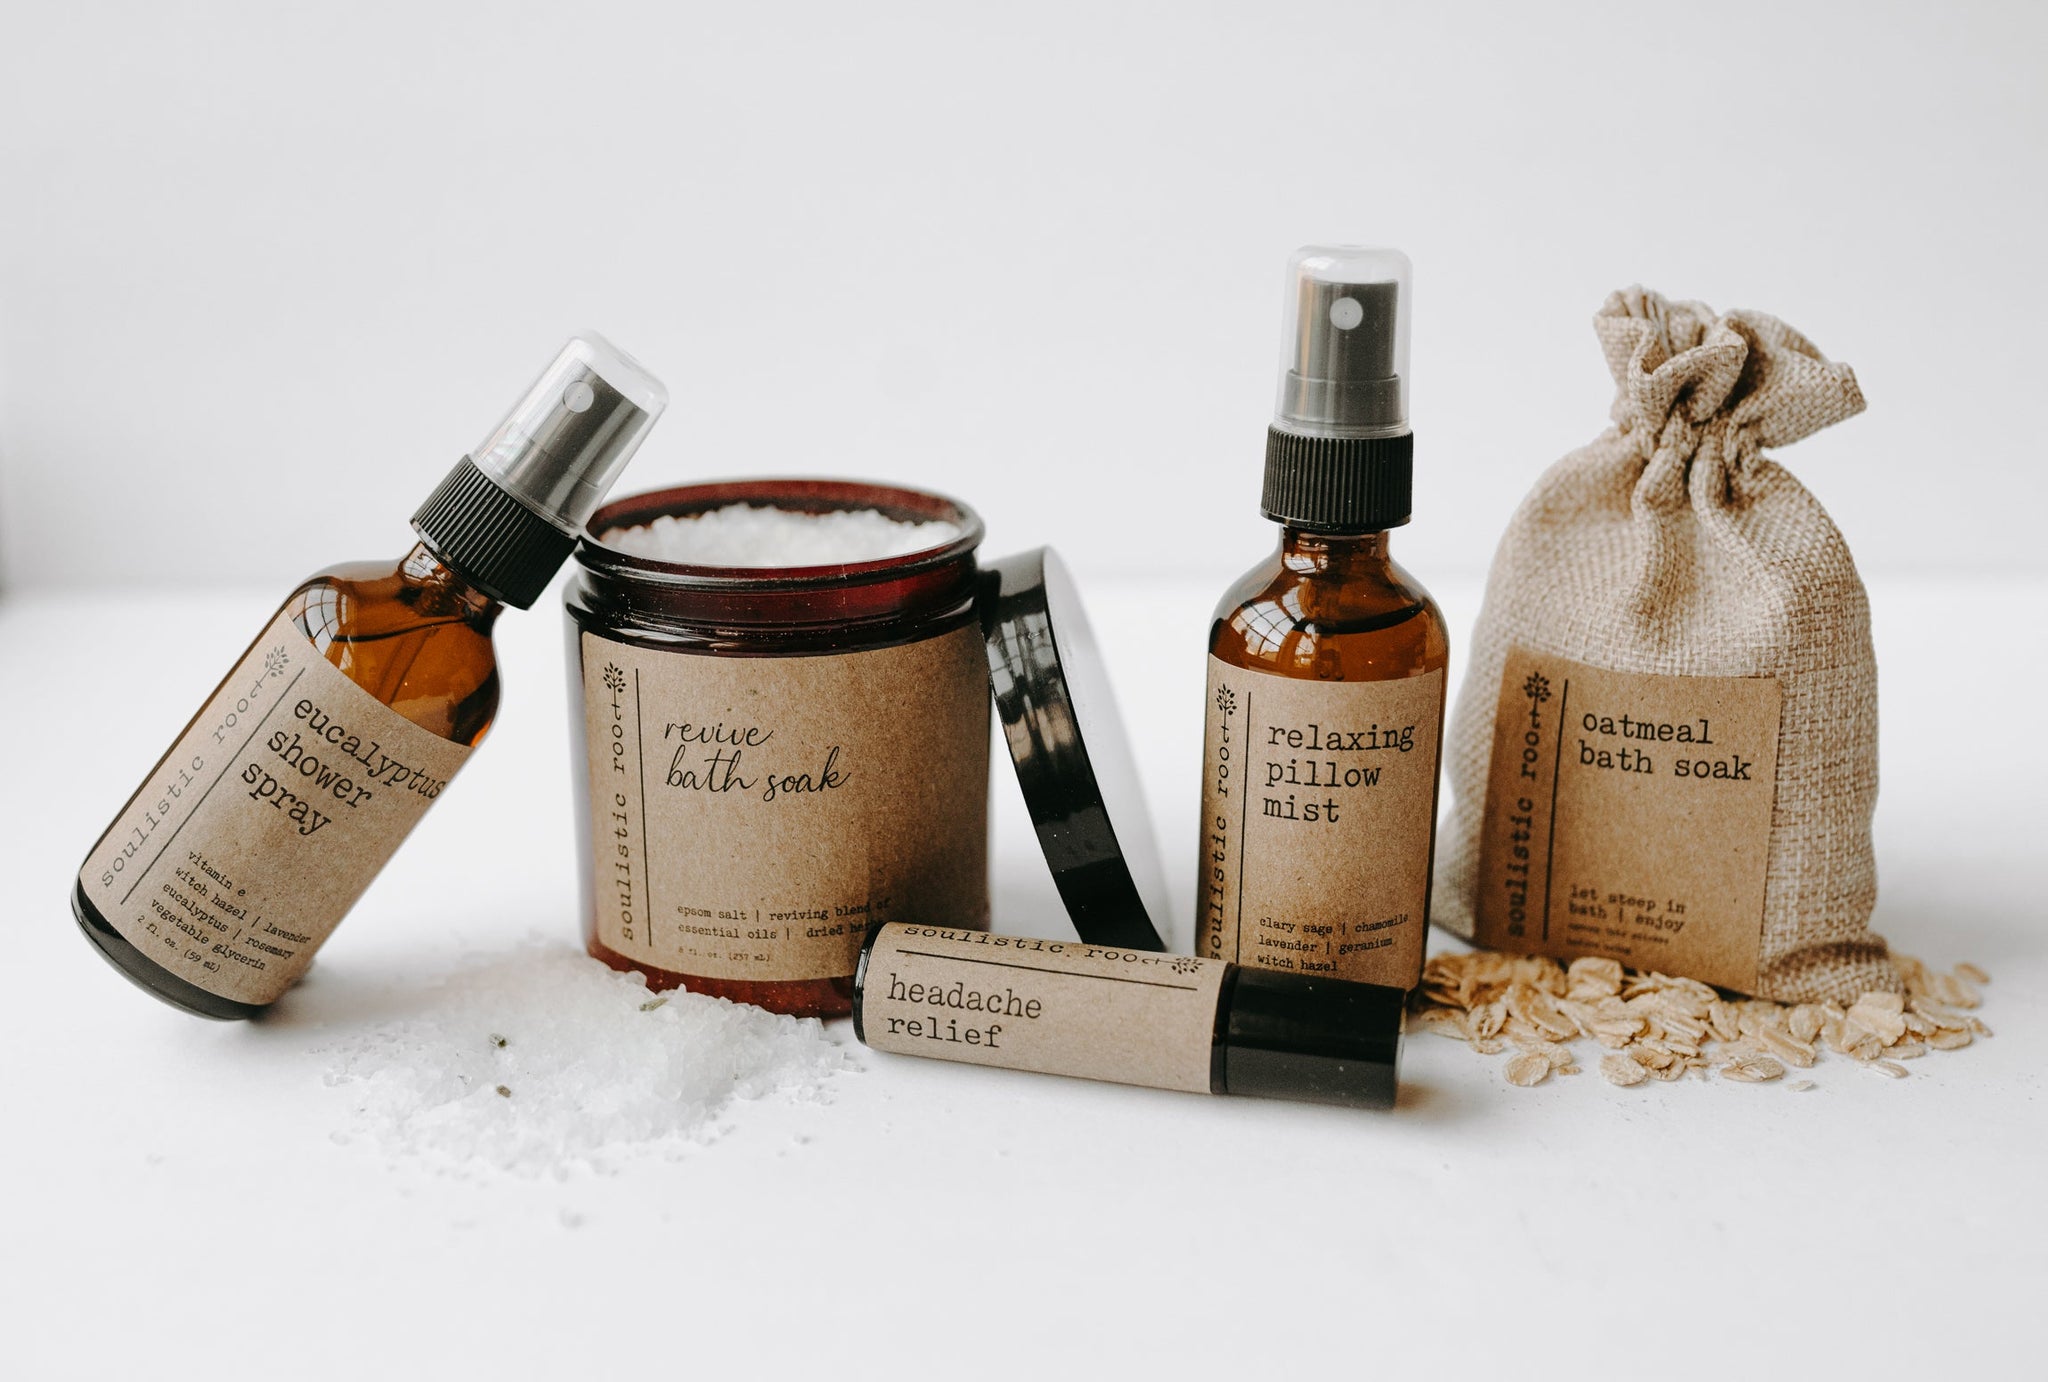 The spa gift set which includes a eucalyptus shower spray, organic lavender oatmeal bath soak, headache relief roller, essential oil & herb revive bath soak and a relaxing pillow mist. The set is on a blanket in front of a white background with some of the oatmeal and epsom salt & herbs spilt out.